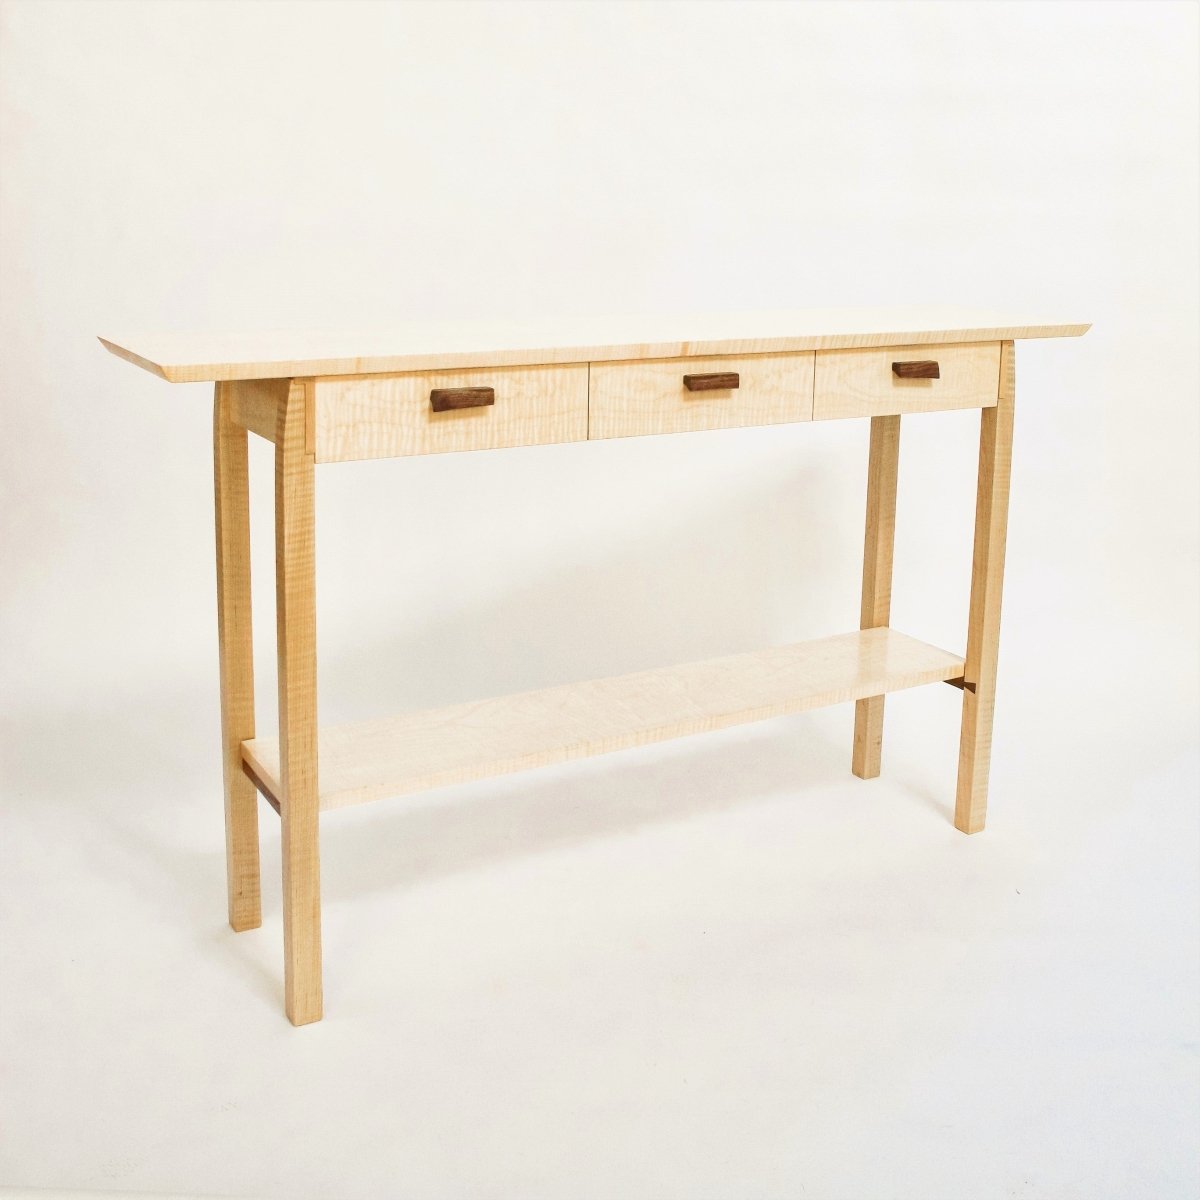 Entry Console Table with Narrow Drawers – Tiger Maple with Walnut